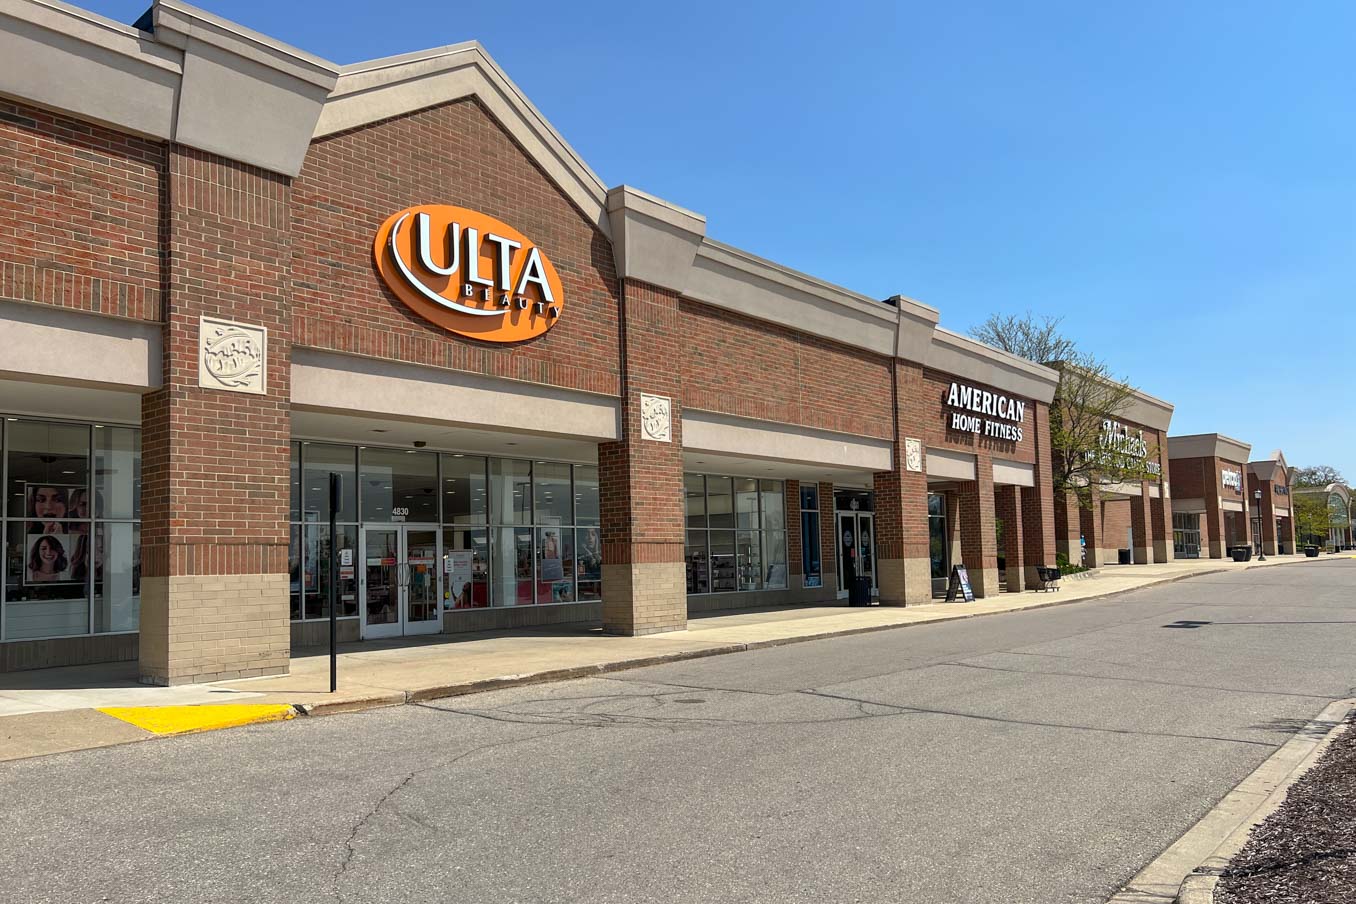 Ulta and American Home Fitness storefront